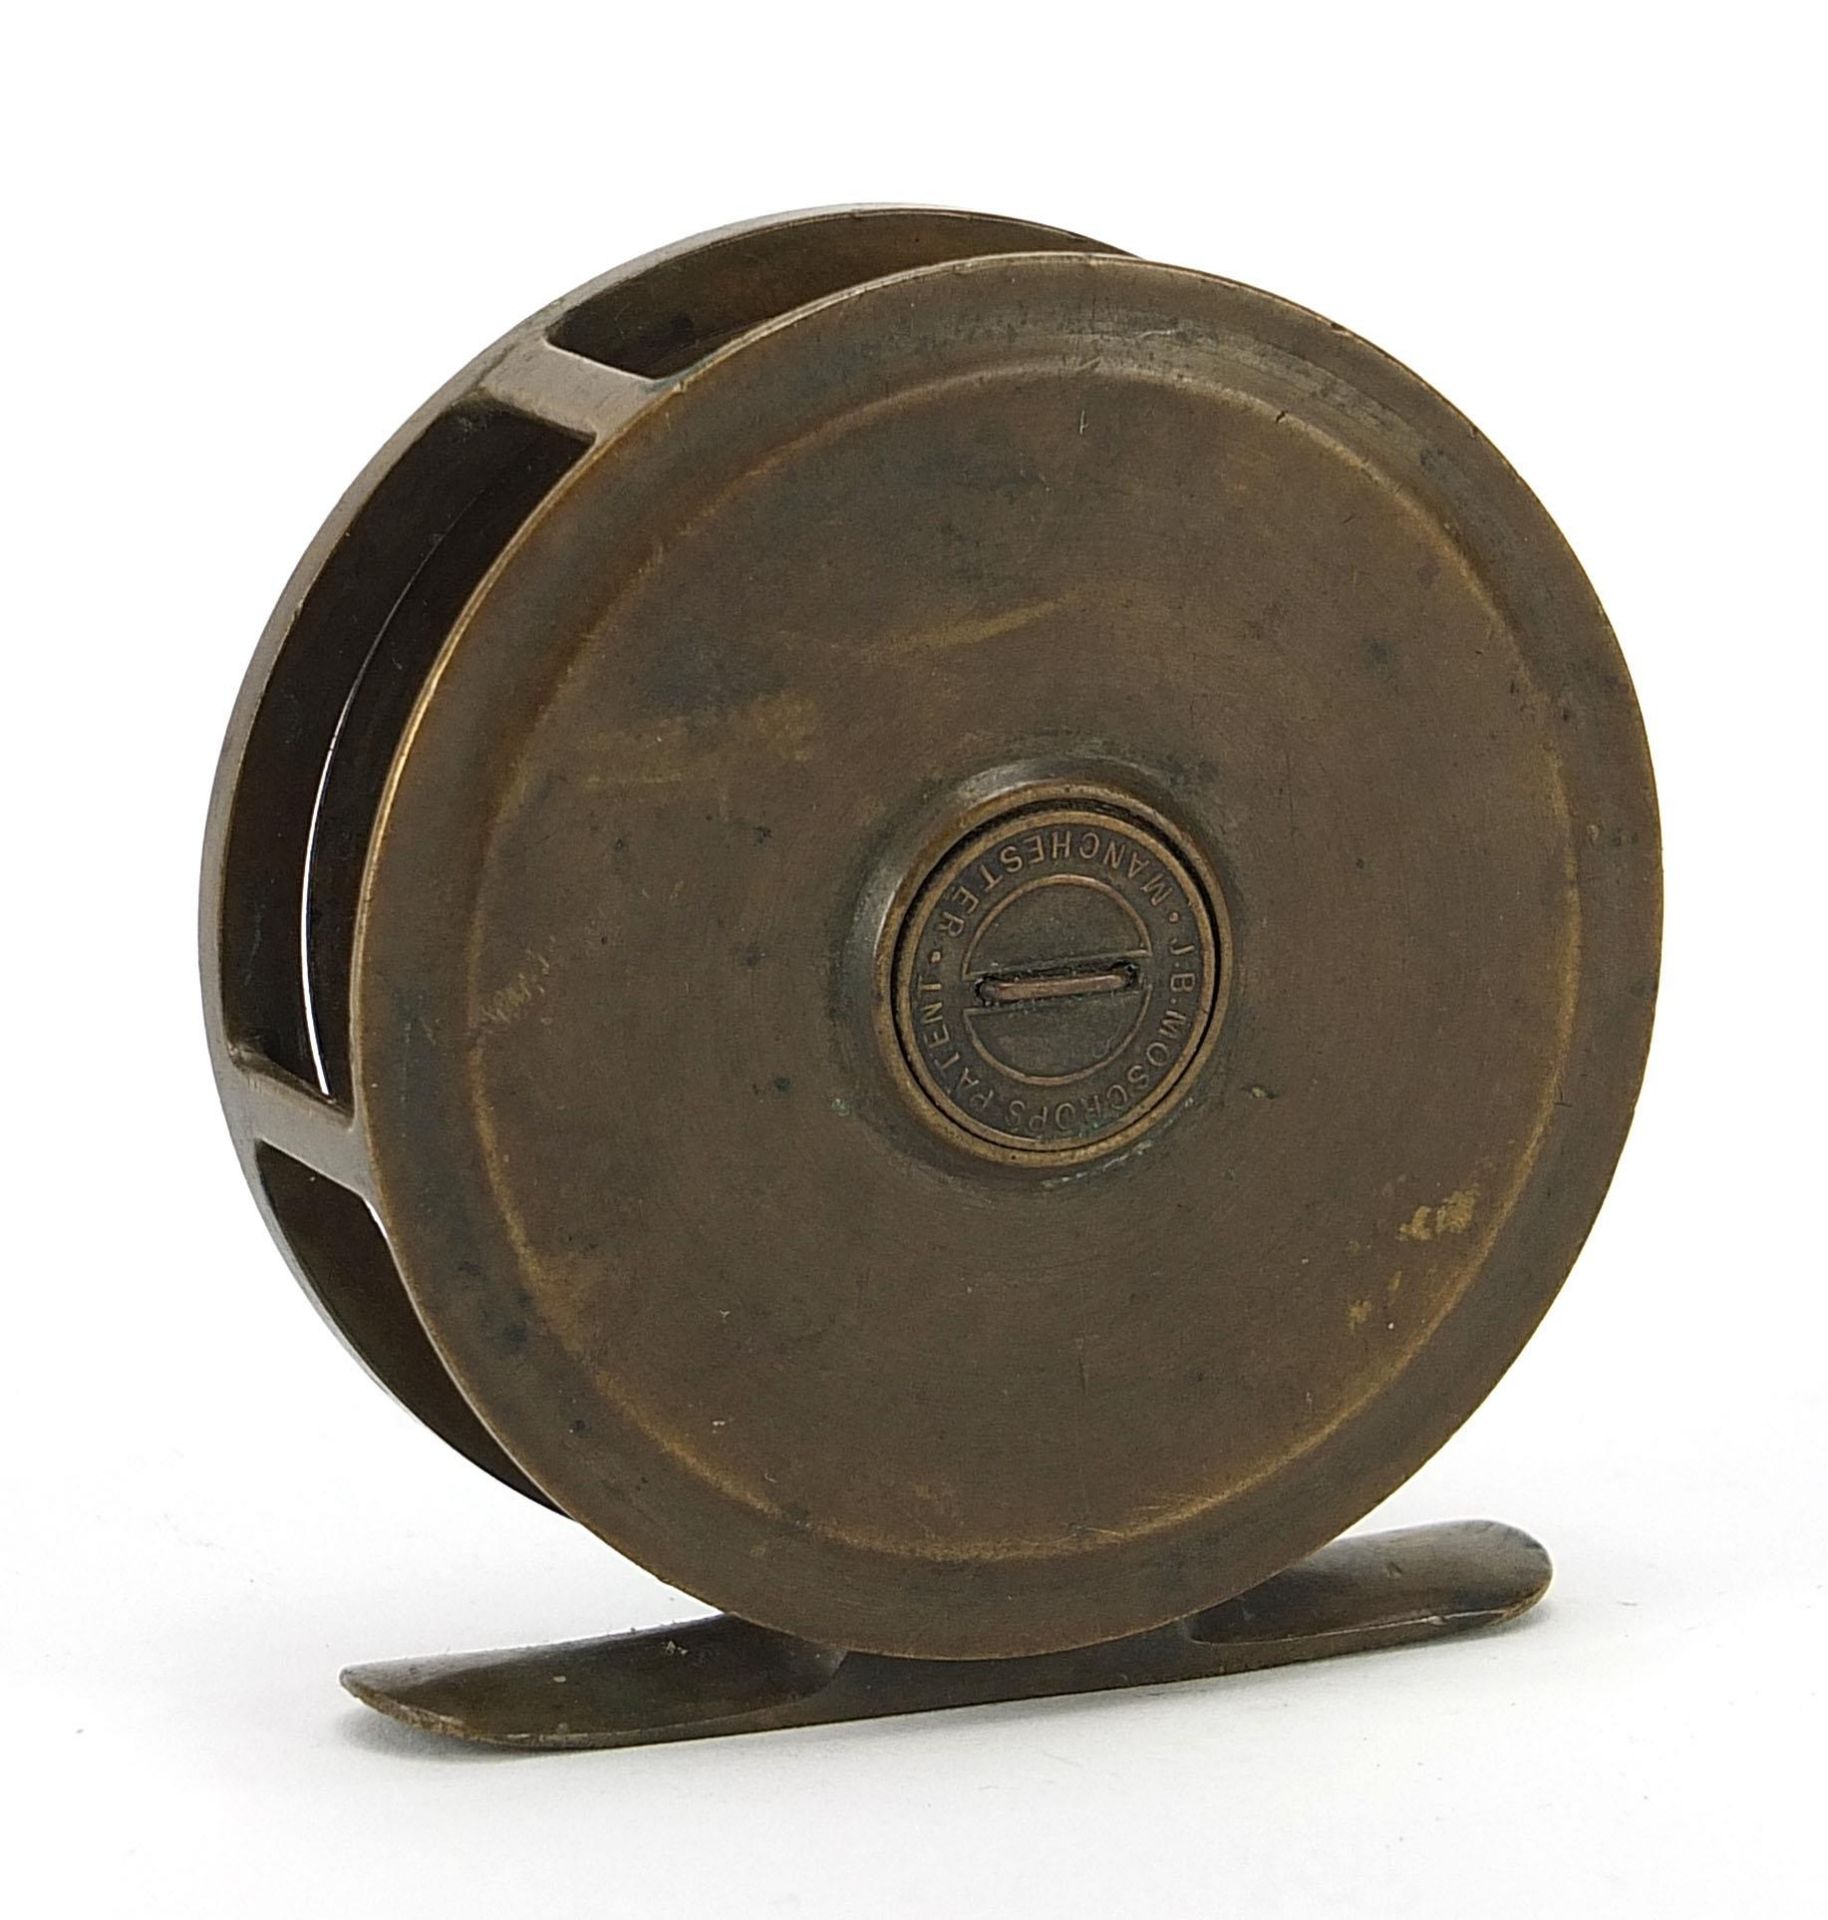 Vintage J B Moscrops brass fishing reel with wooden handle, 7.6cm in diameter - Image 2 of 4